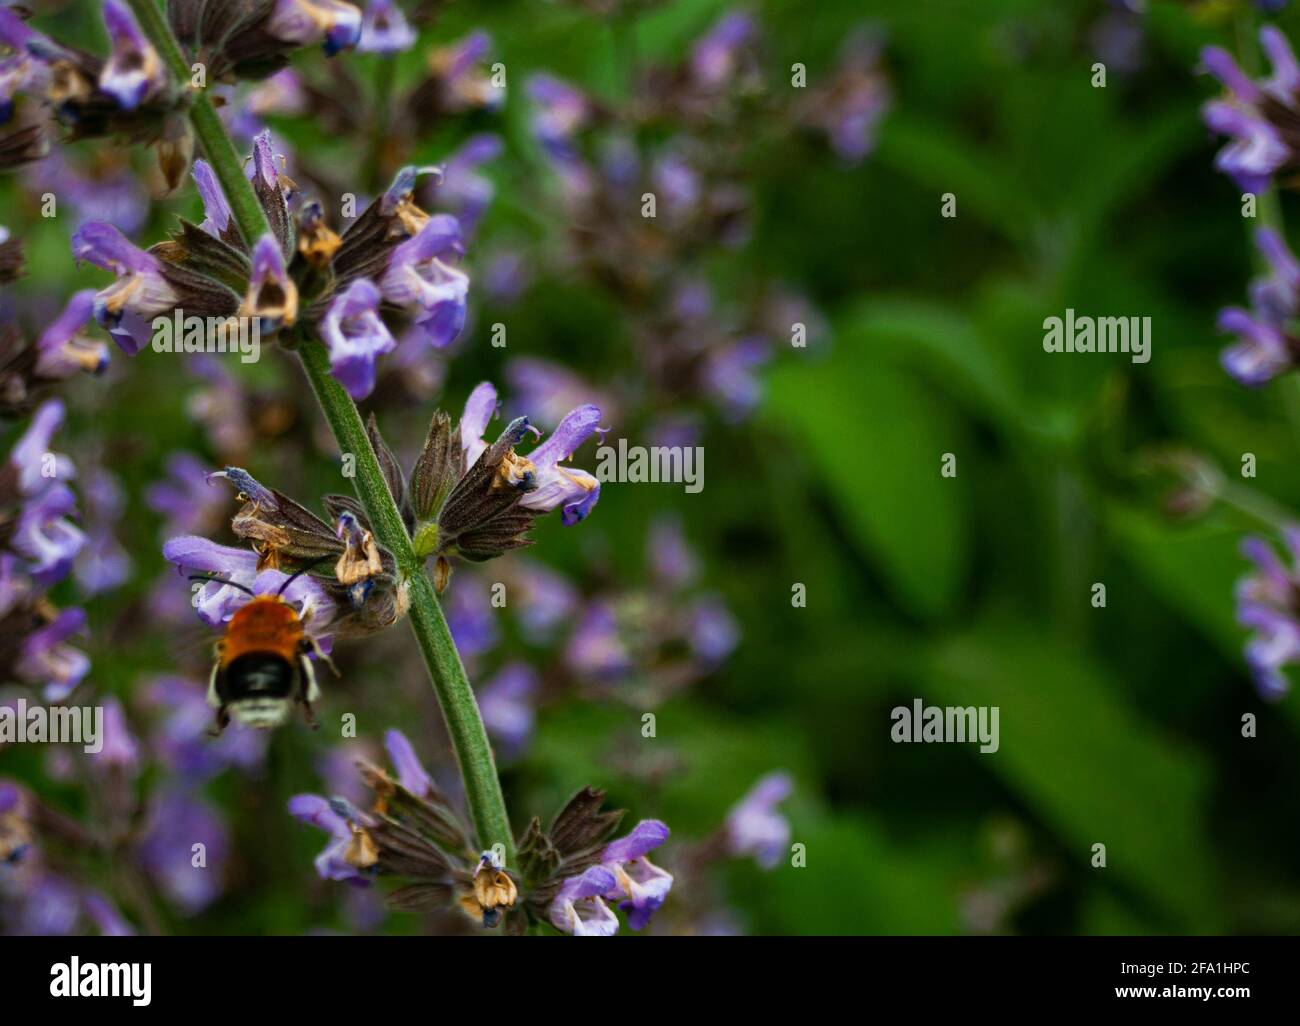 Bee Collecting Pollen From Purple Flowers Stock Photo